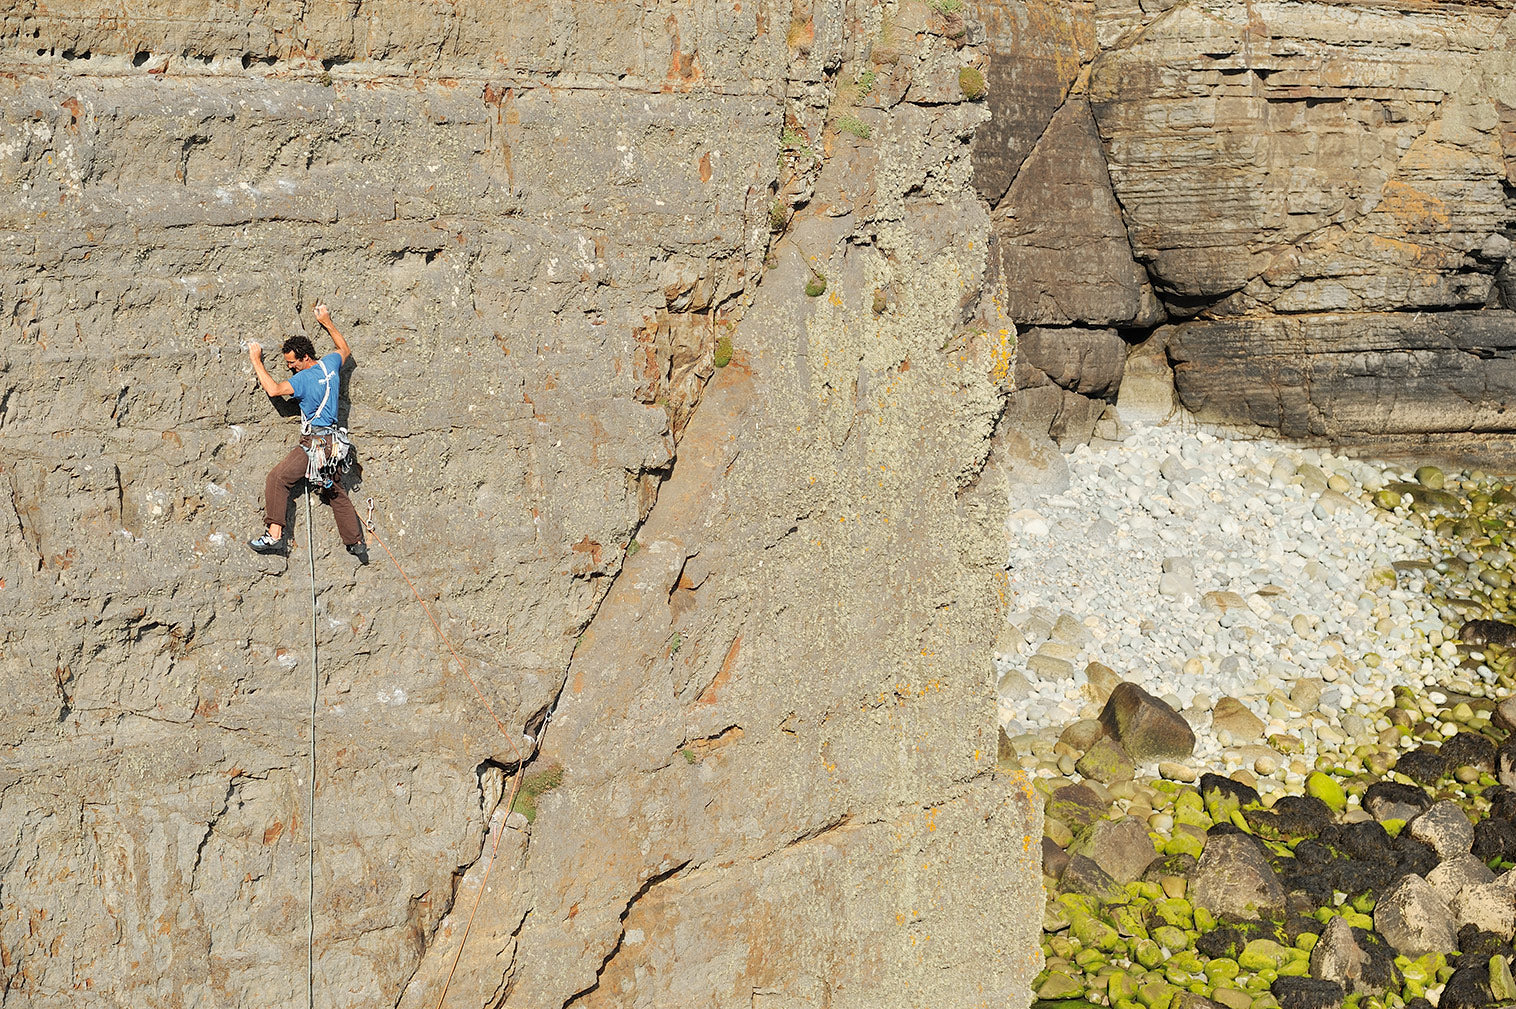 Nick Bullock in-between the breaks of Byzantium (E4 6a), Craig Dorys, north Wales. Described in the guidebook as a “somewhat decaying version of Right Wall in the Llanberis Pass”. © Ray Wood